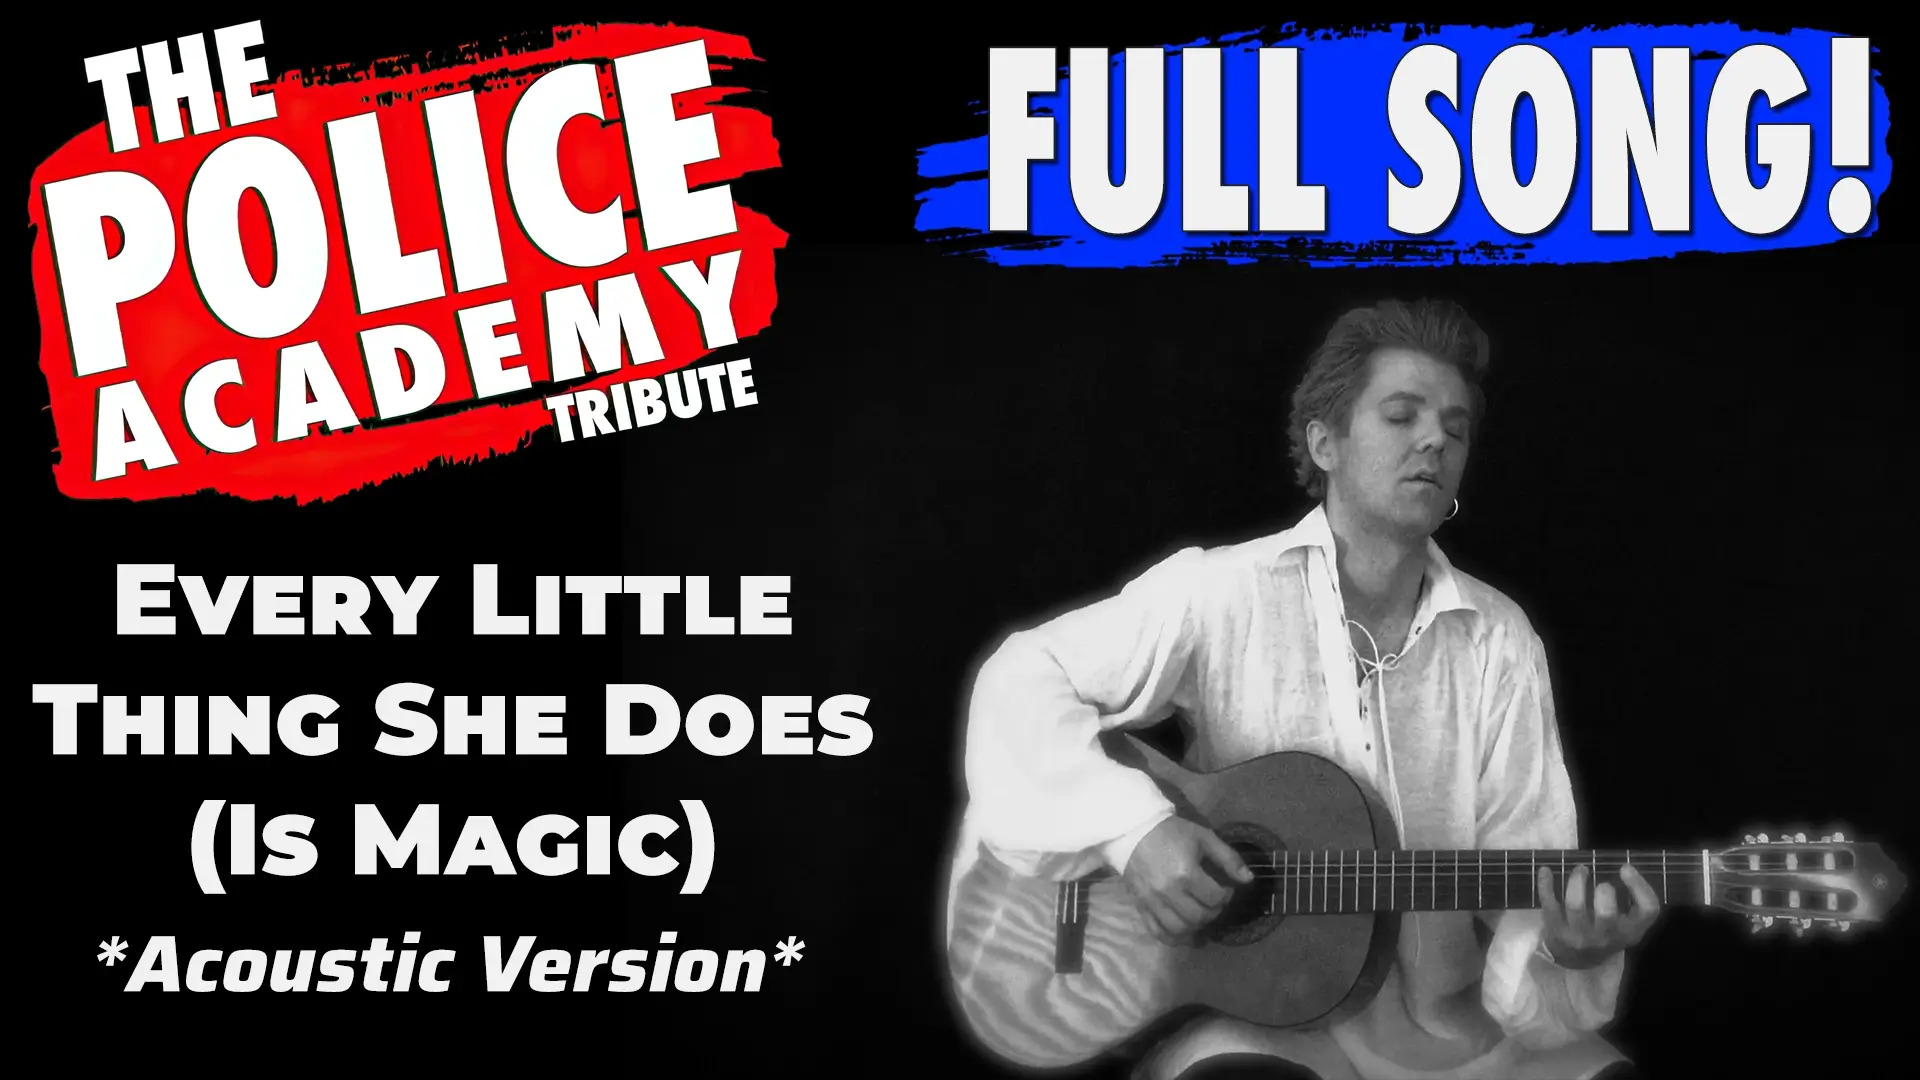 "Every Little Thing She Does is Magic" Acoustic Version music video by The Police Academy